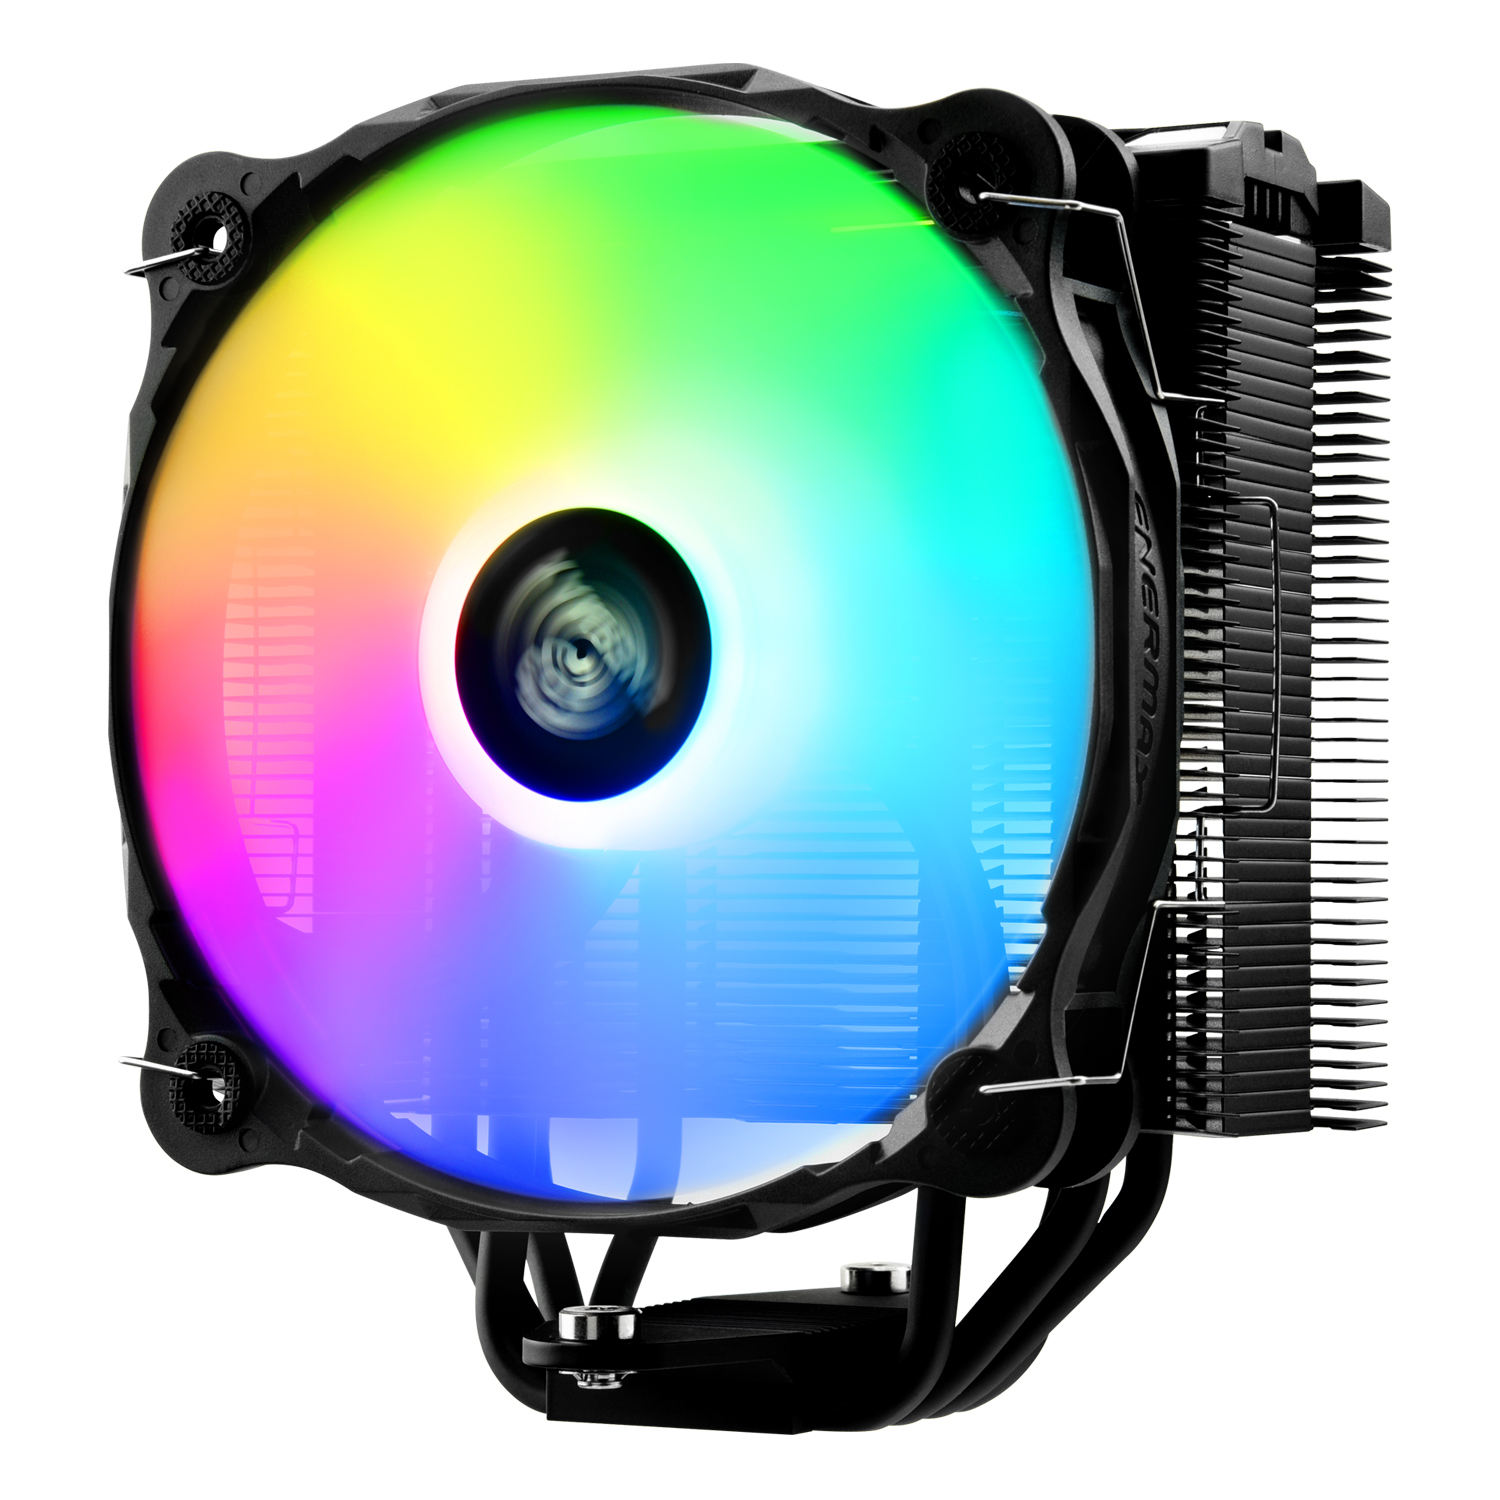 ETS-F40-FS series 140mm CPU air cooler-Black - Products - ENERMAX